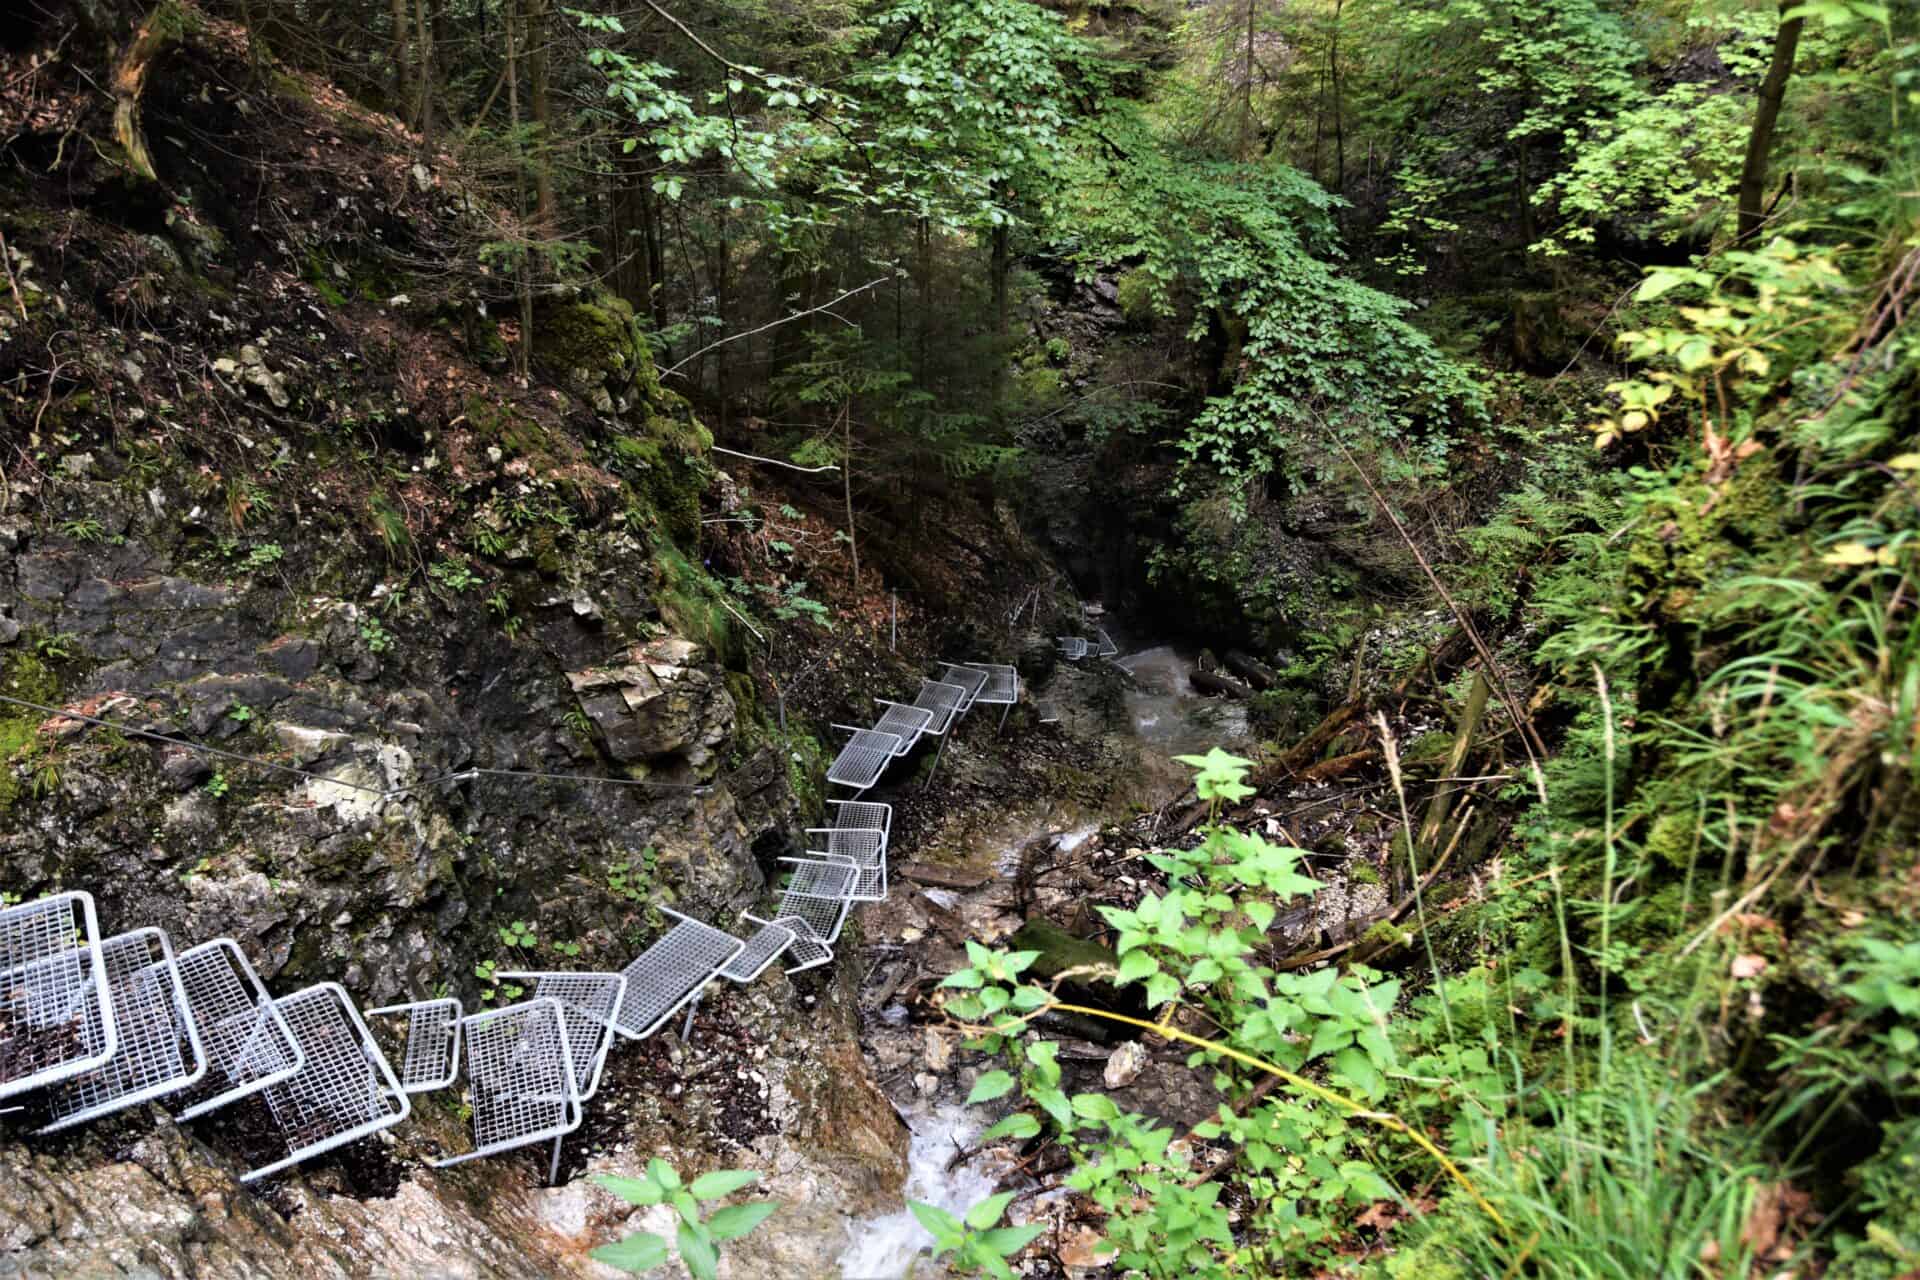 a series of metal steps leading down into a gorge next to a small stream surrounded by luch vegetation, Suchá Belá Gorge, Slovakia